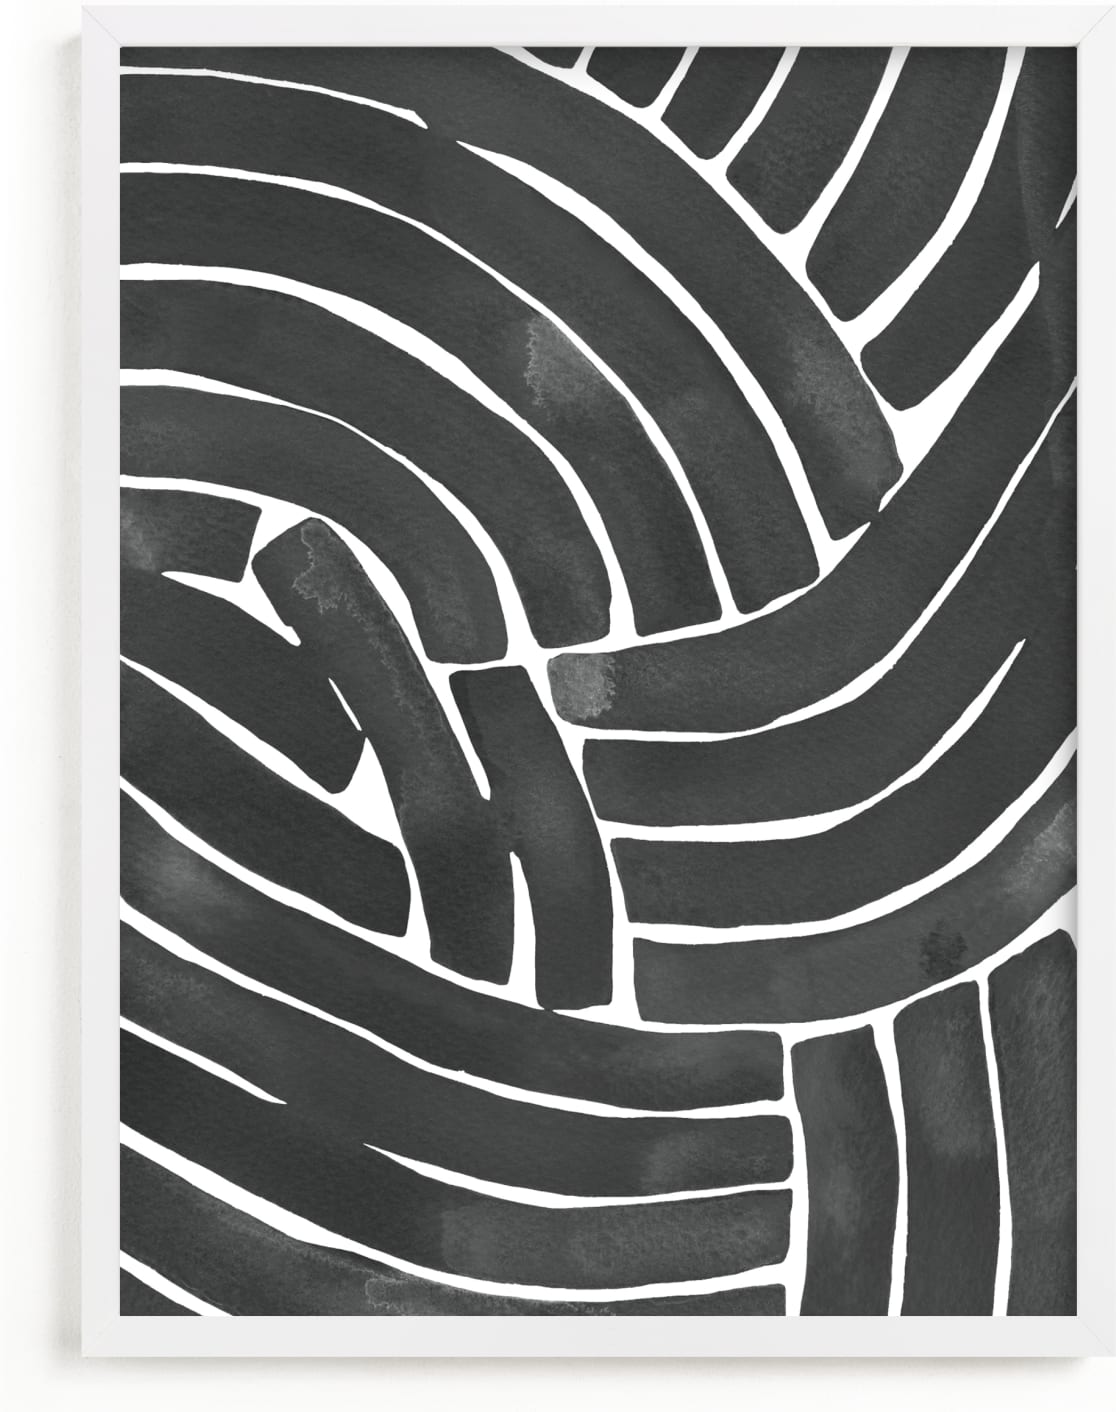 This is a white art by Kristine Sarley called Curvy lines.